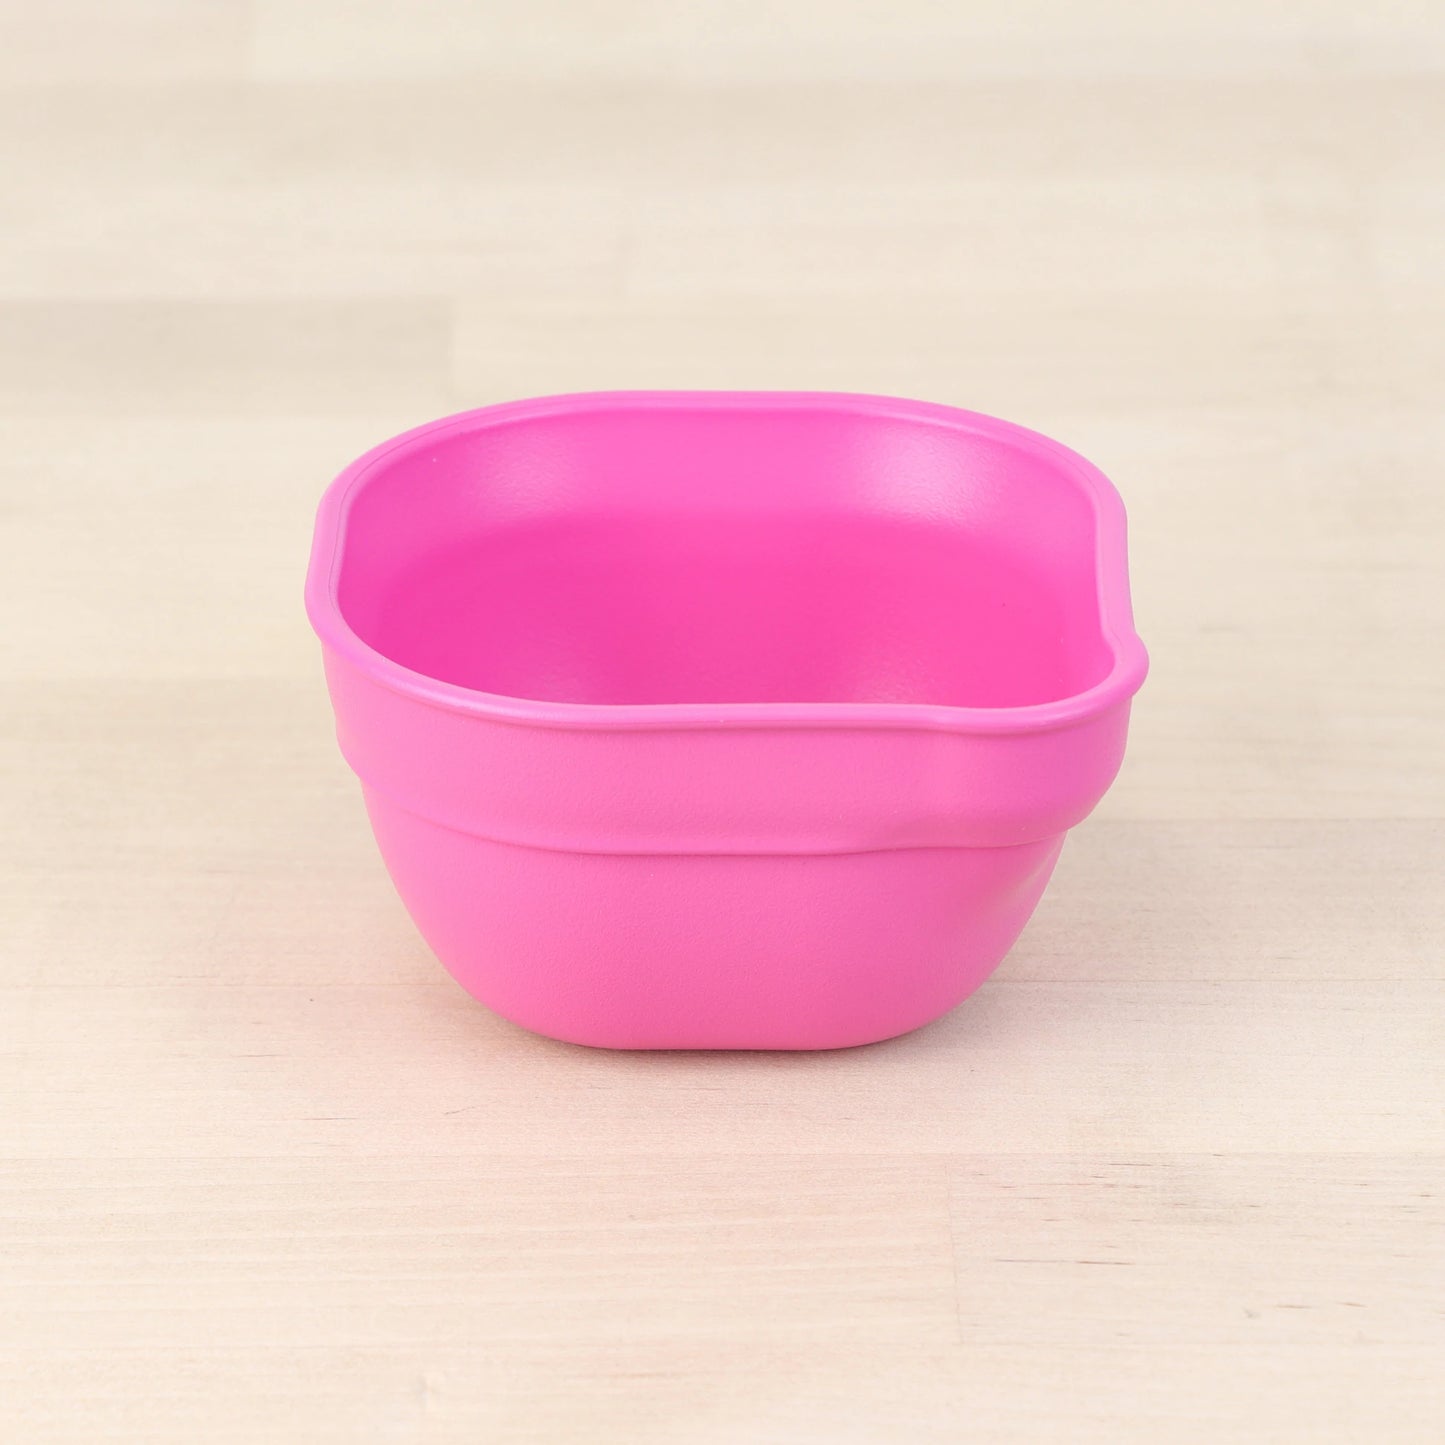 re-play dip n pour bowls bright pink